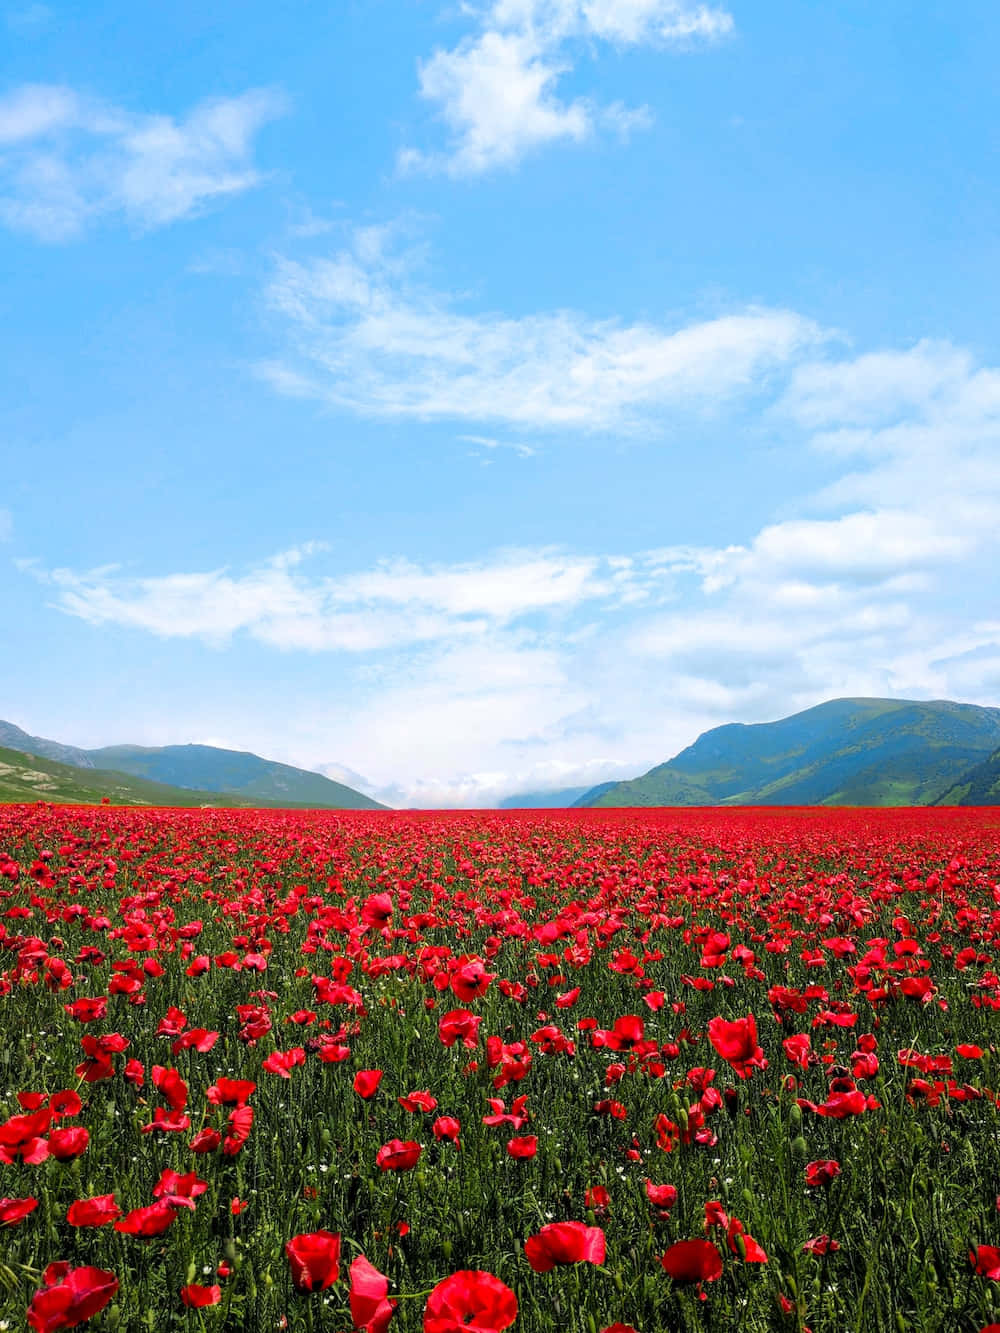 "Take in the Beauty of a Blooming Flower Field"